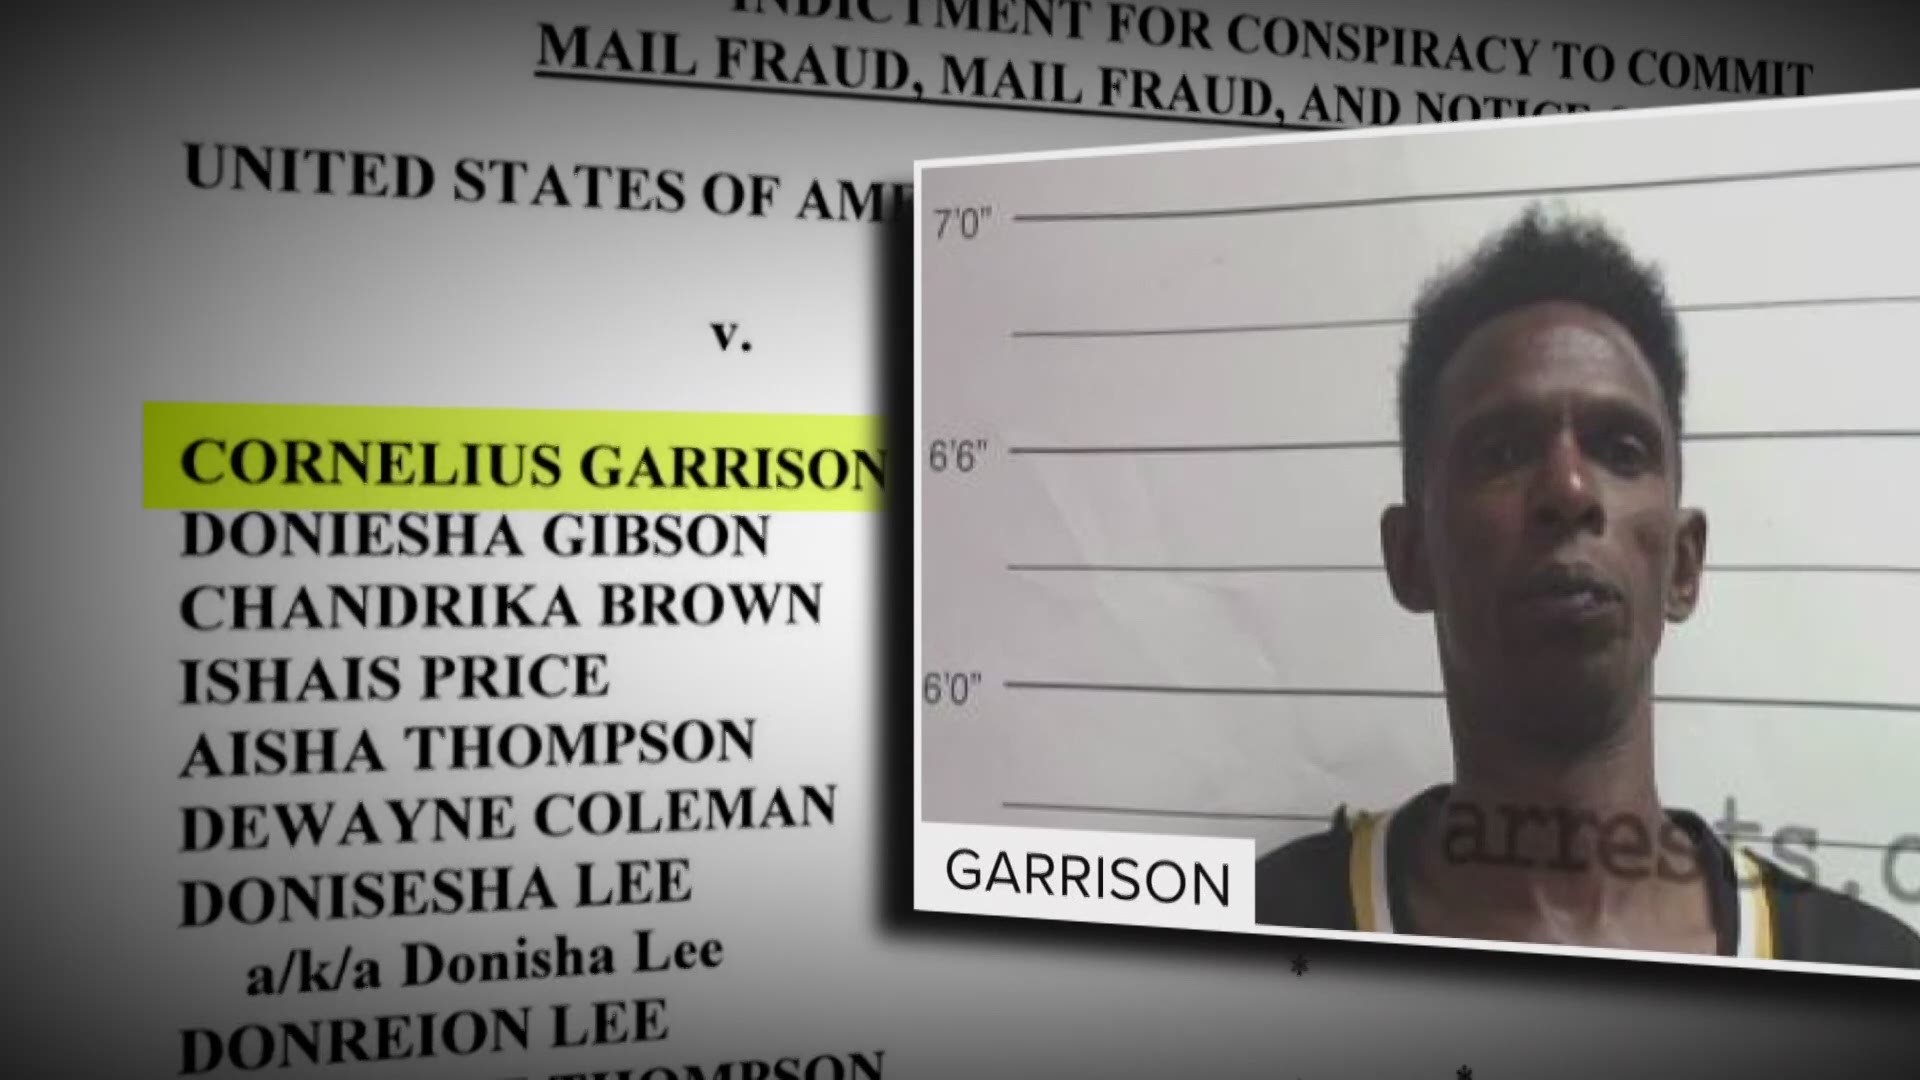 Sources say Cornelius Garrison was cooperating with the FBI and U.S. Attorney's Office in the case.